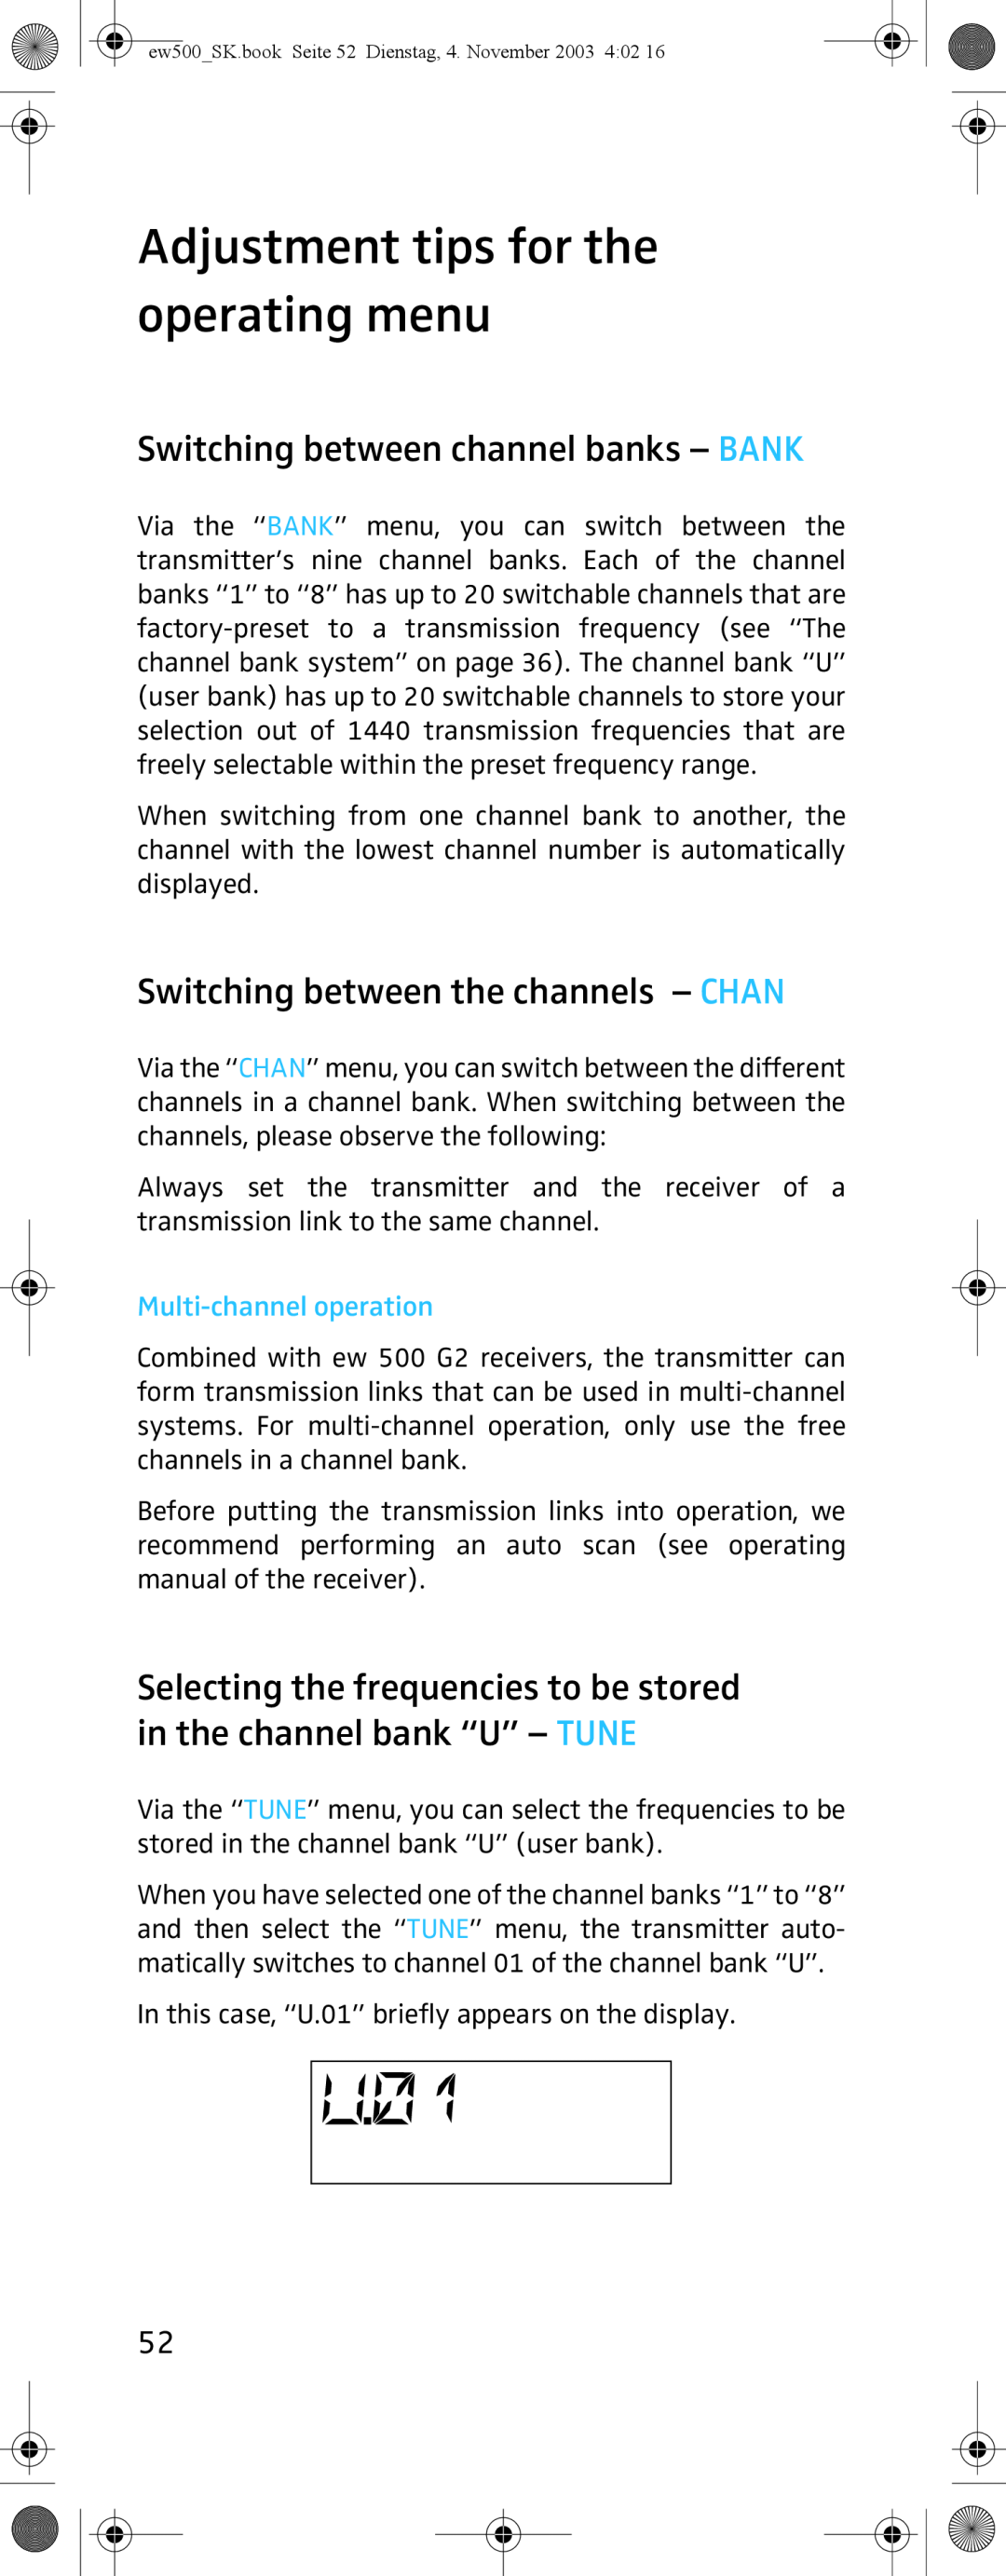 Sennheiser SK 500 G2 manual Adjustment tips for the operating menu, Switching between channel banks - BANK 